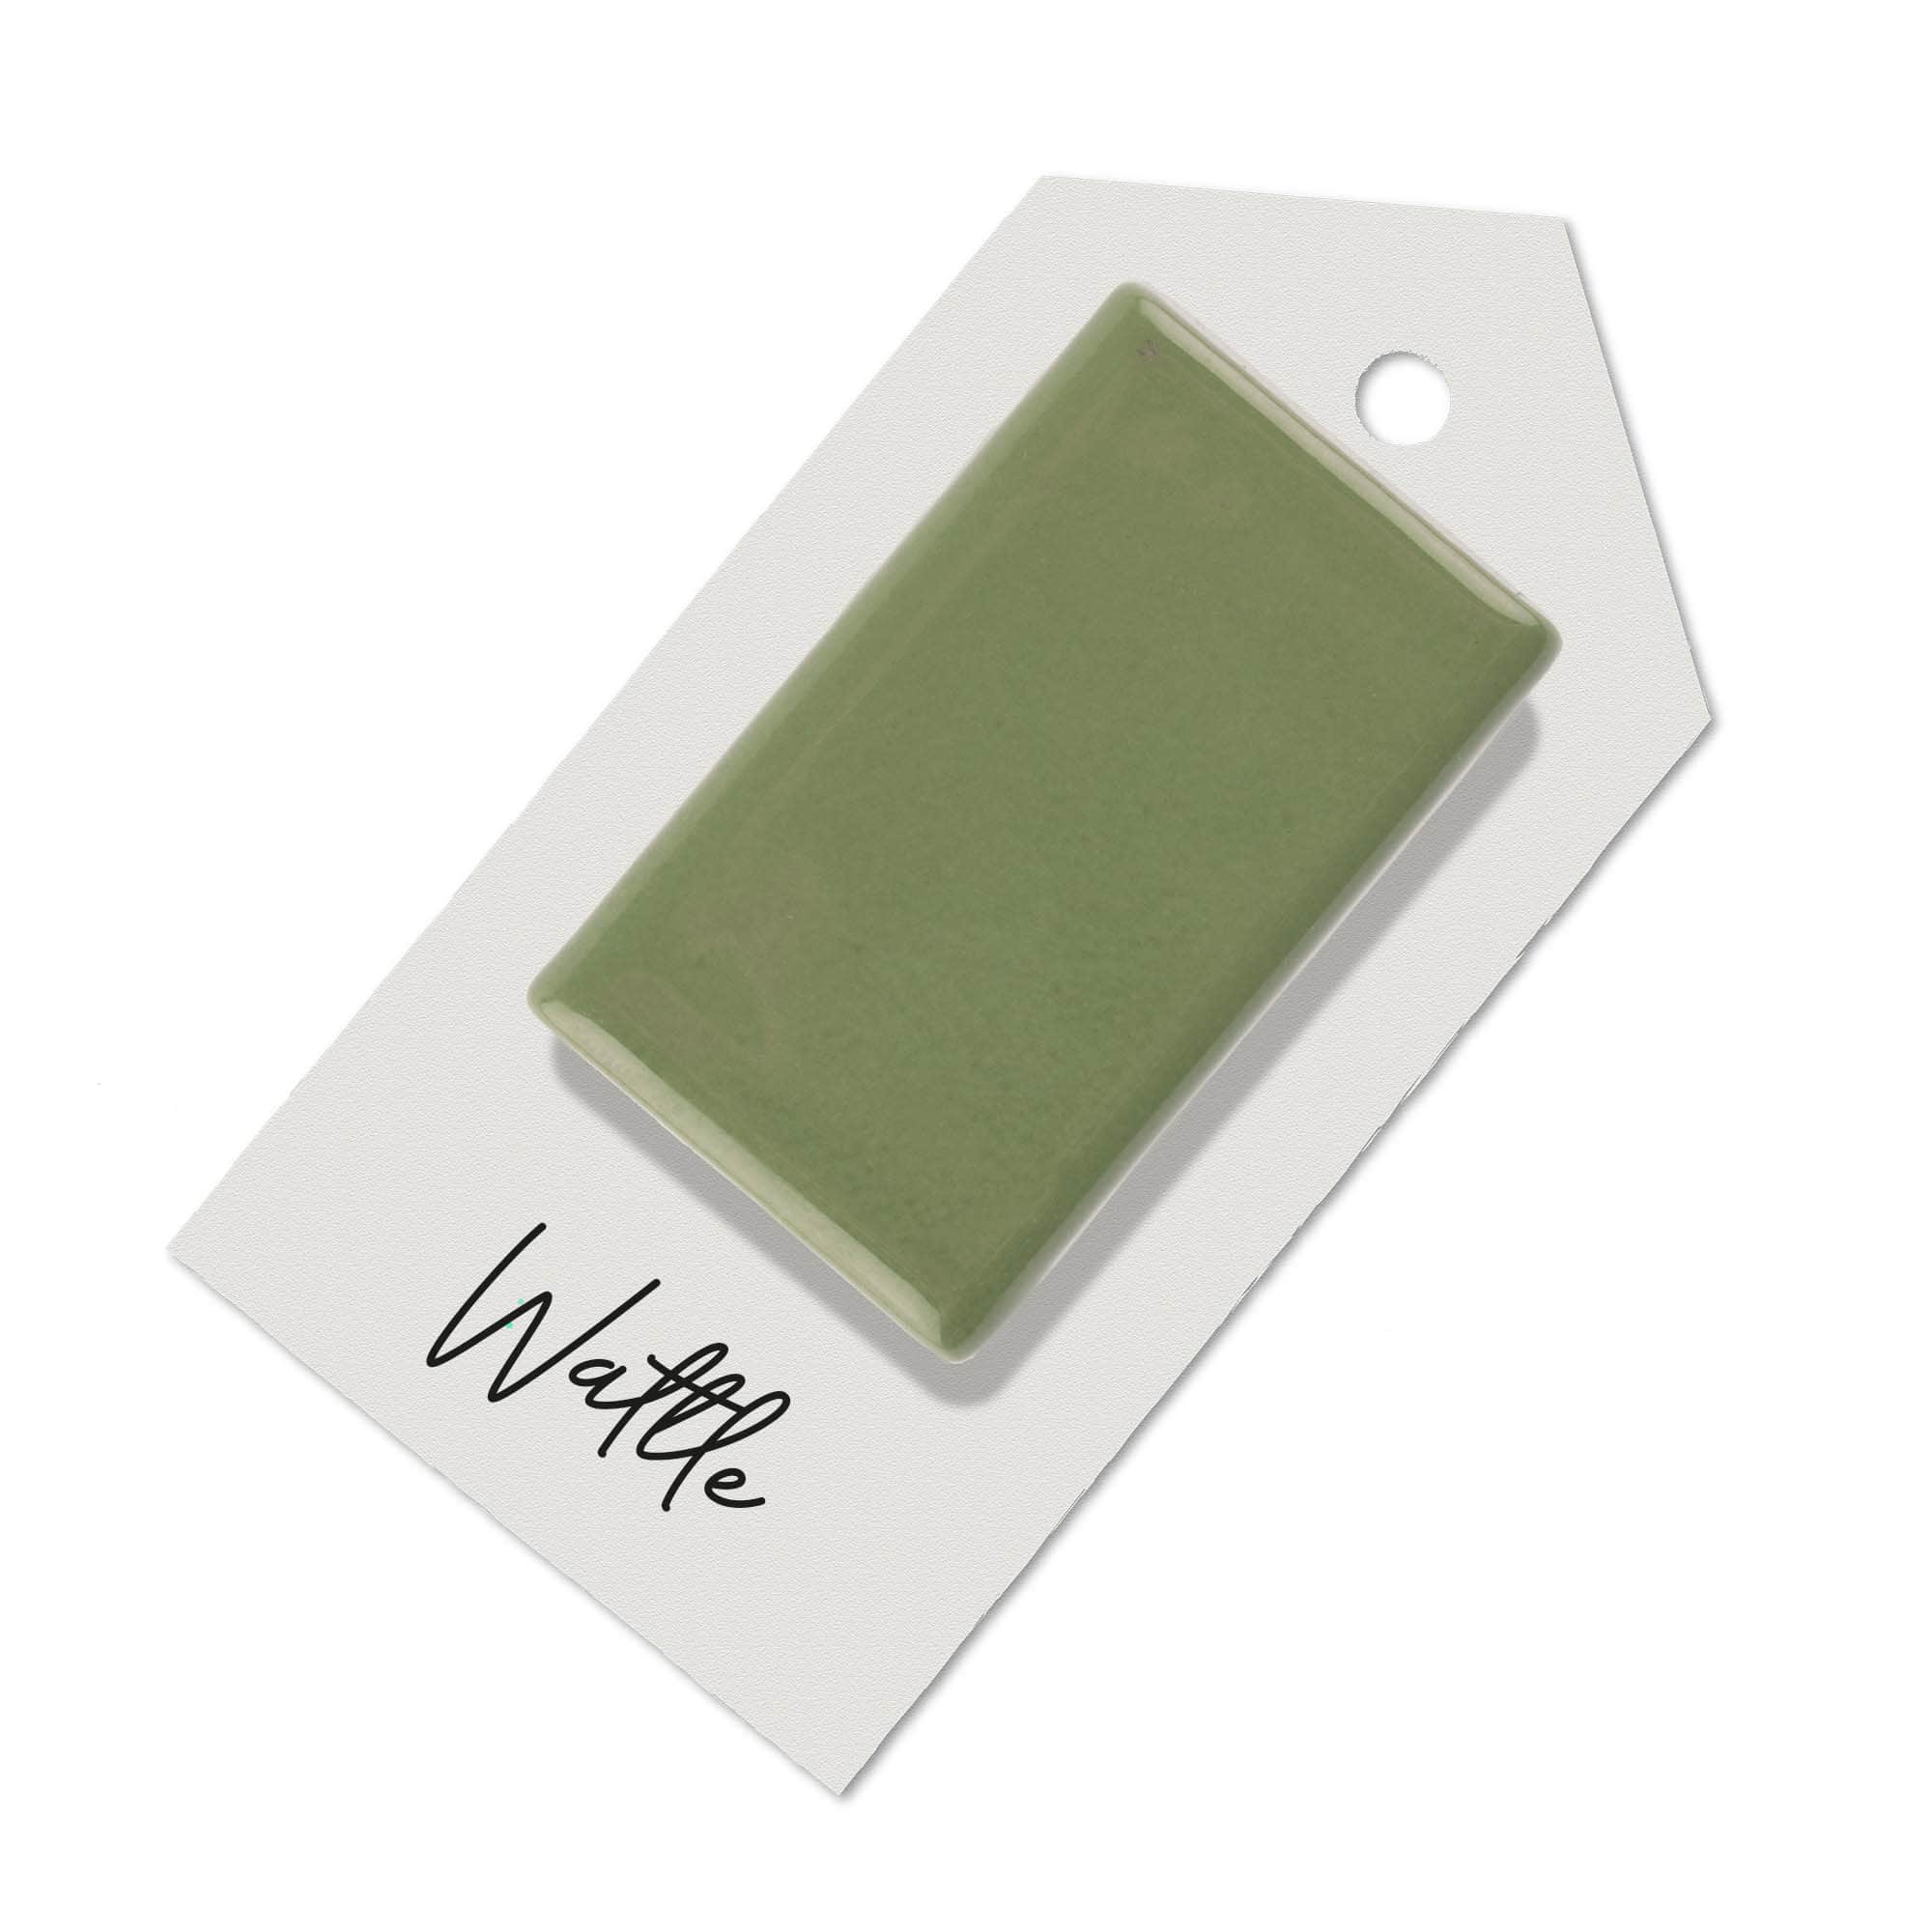 64. Wattle sample for Aga range cooker re-enamelling & reconditioned cookers